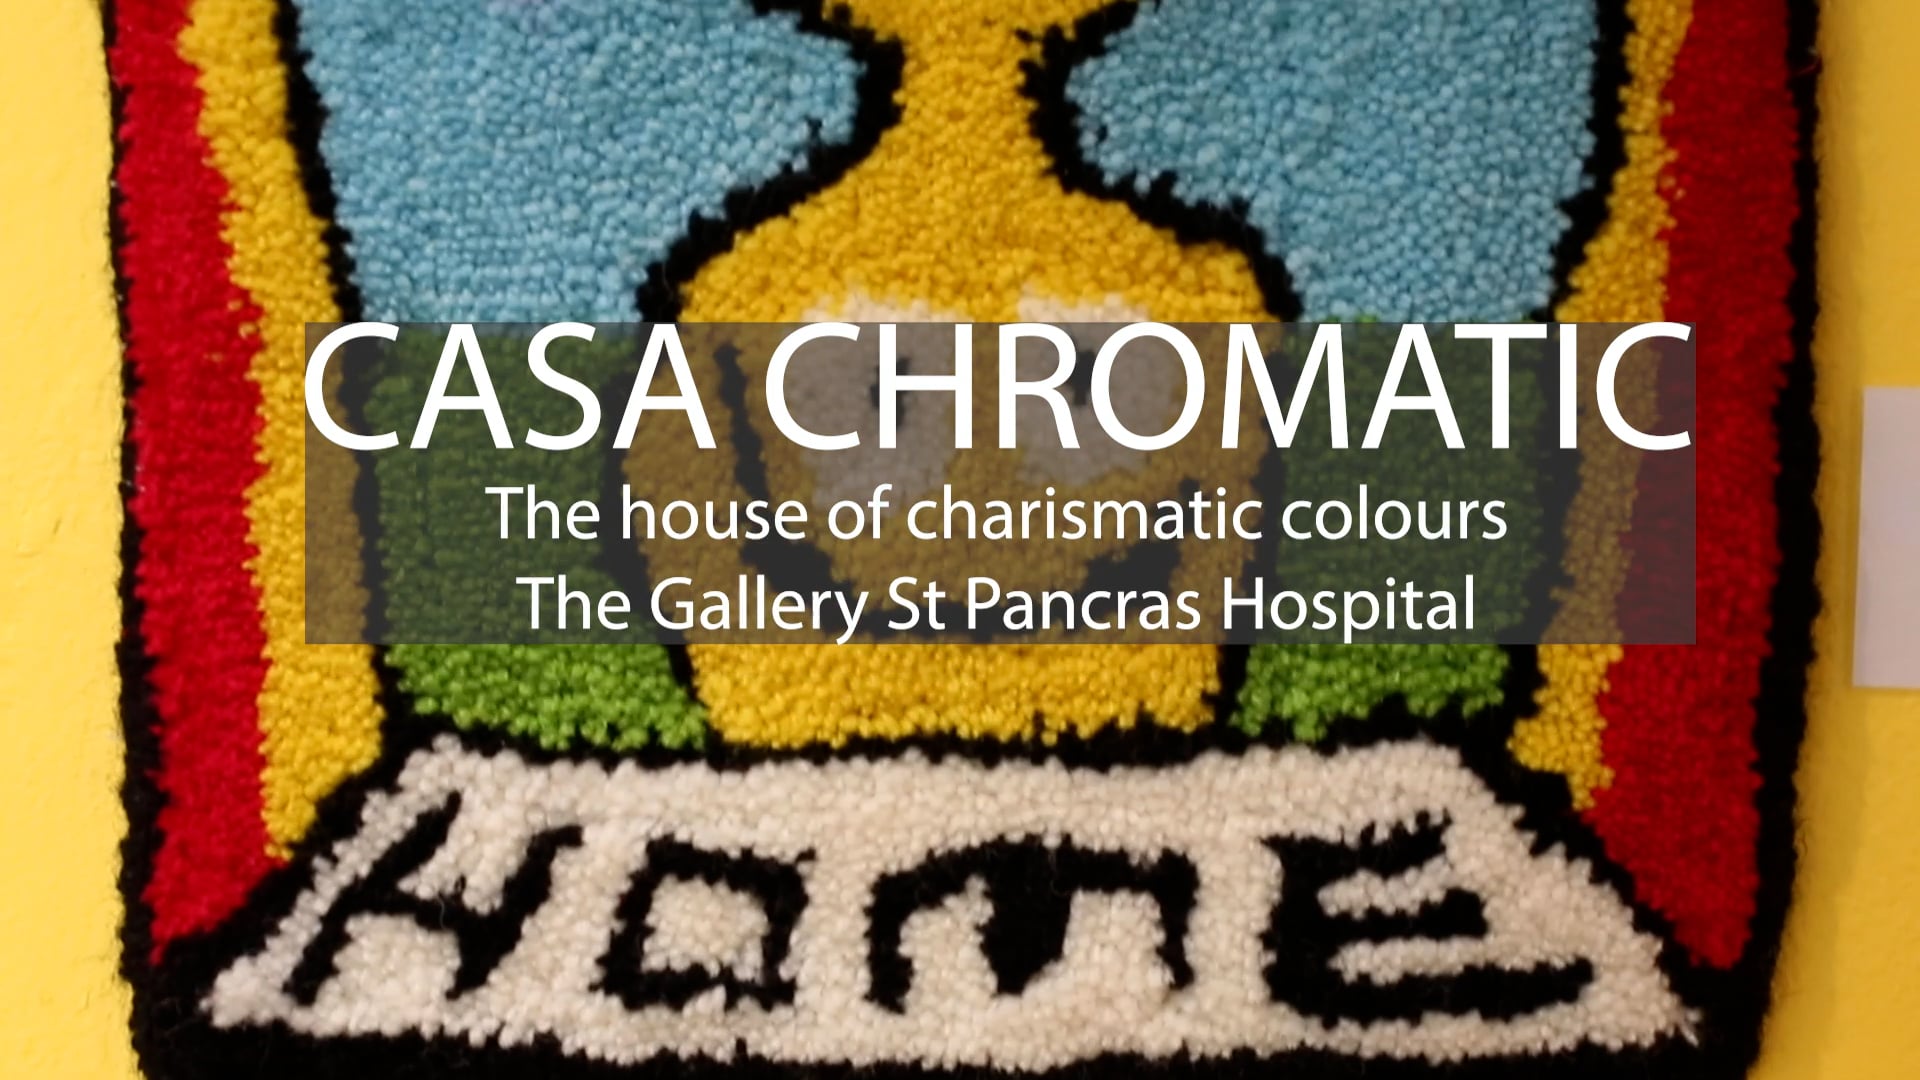 CASA CHROMATIC
the house of charismatic colours